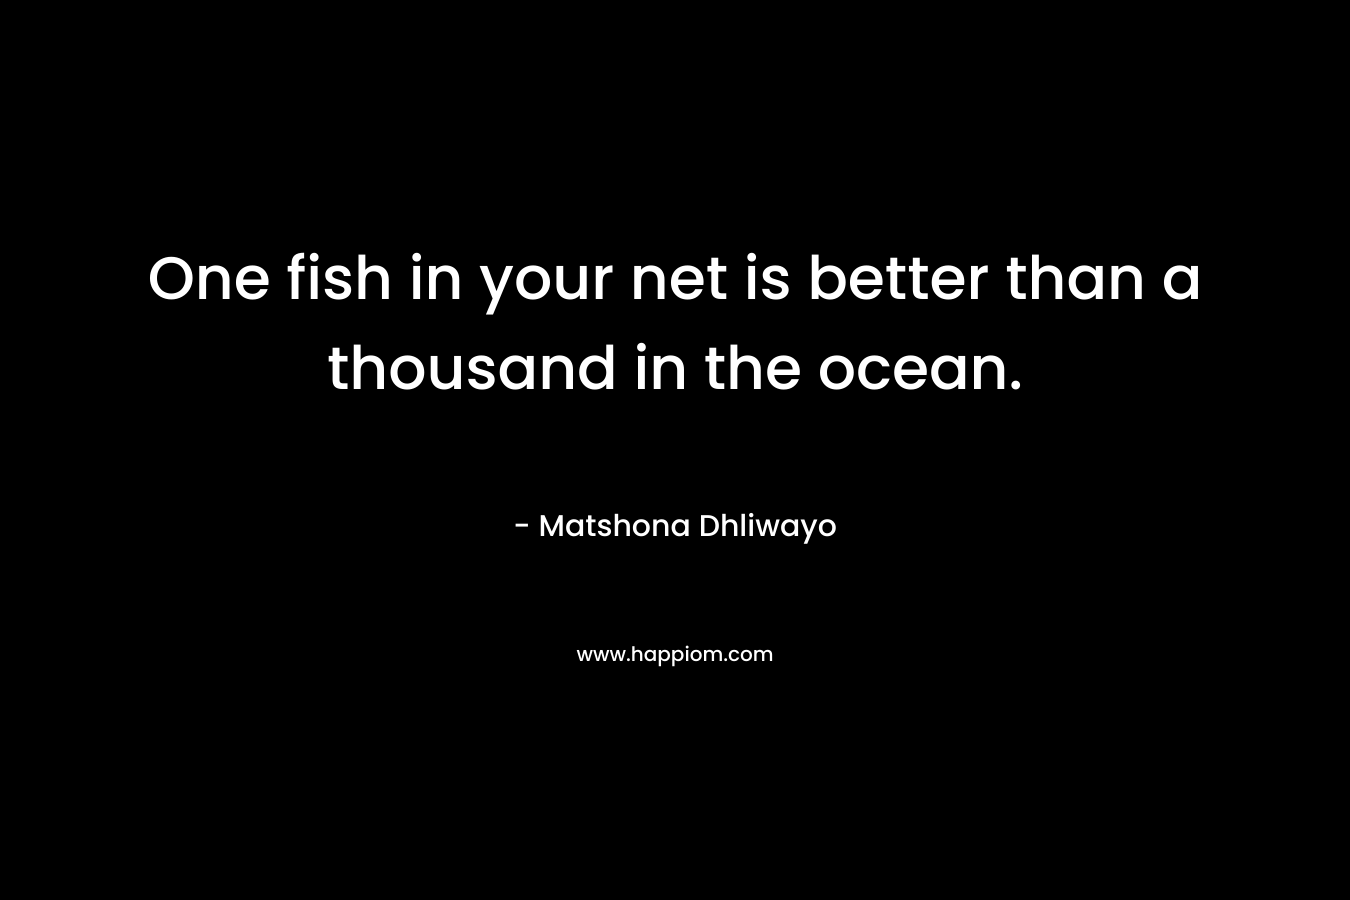 One fish in your net is better than a thousand in the ocean.